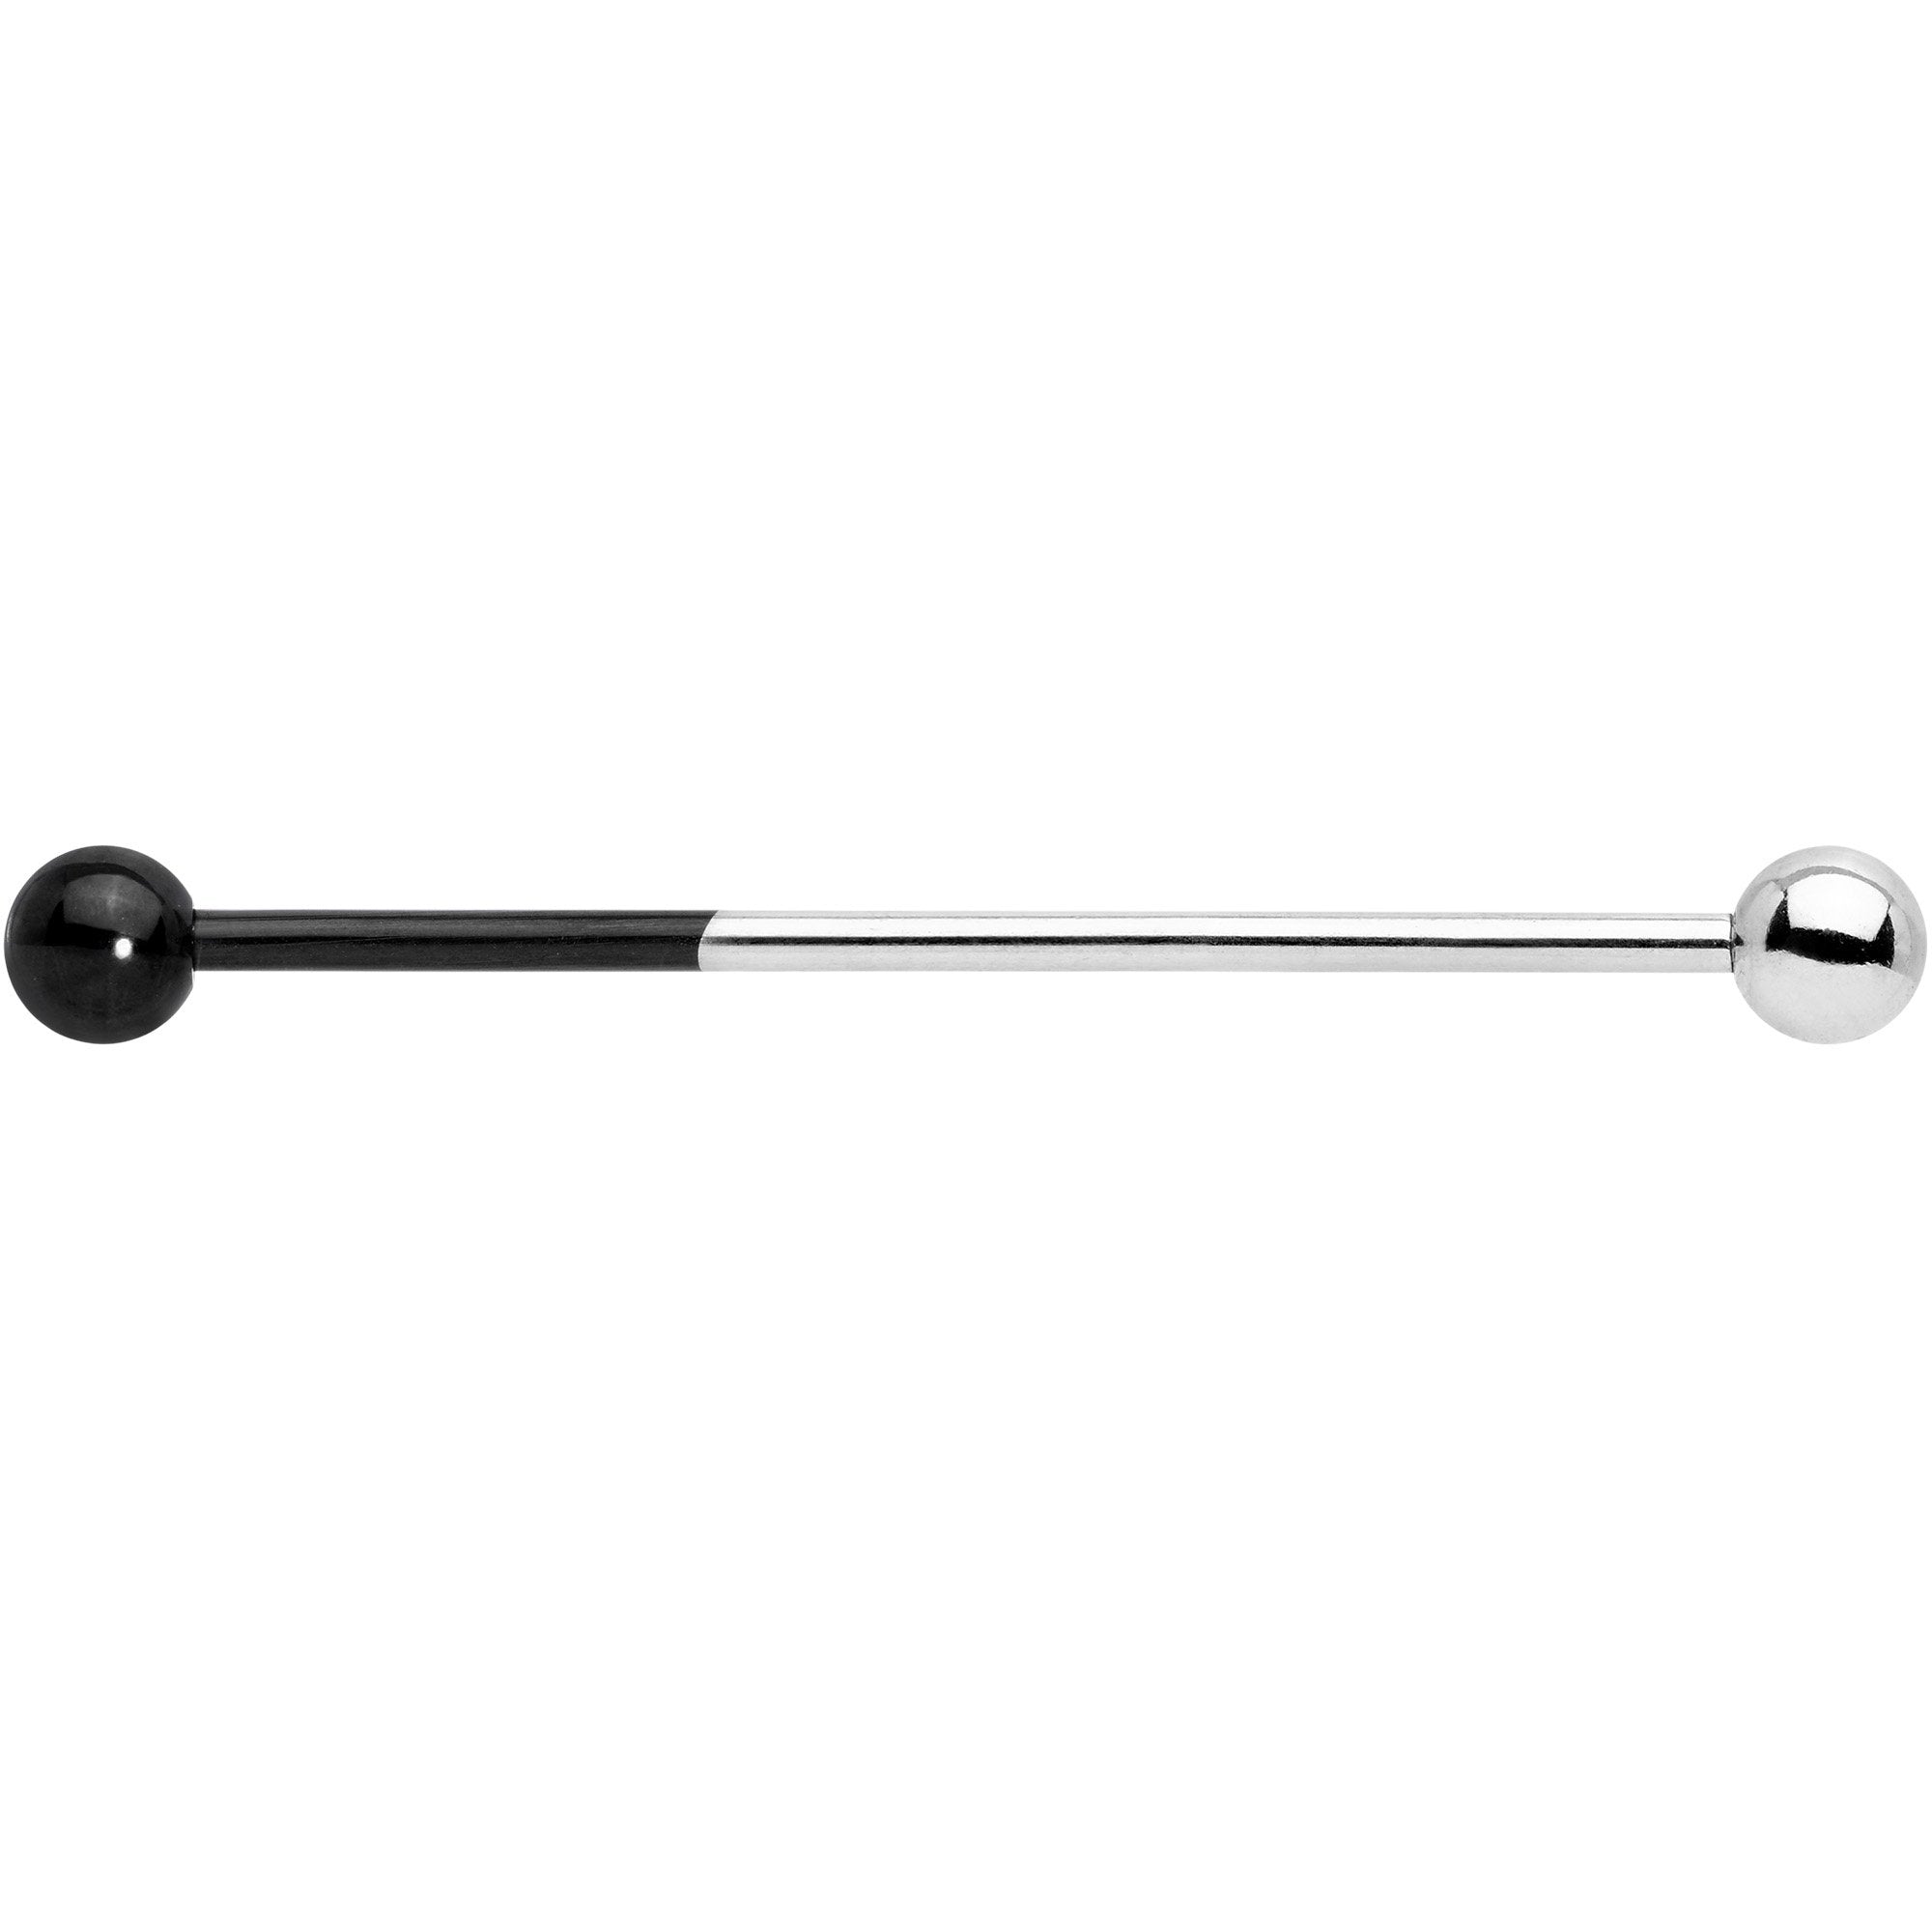 14 Gauge Black and Steel Tone Two Tone Industrial Barbell 38mm